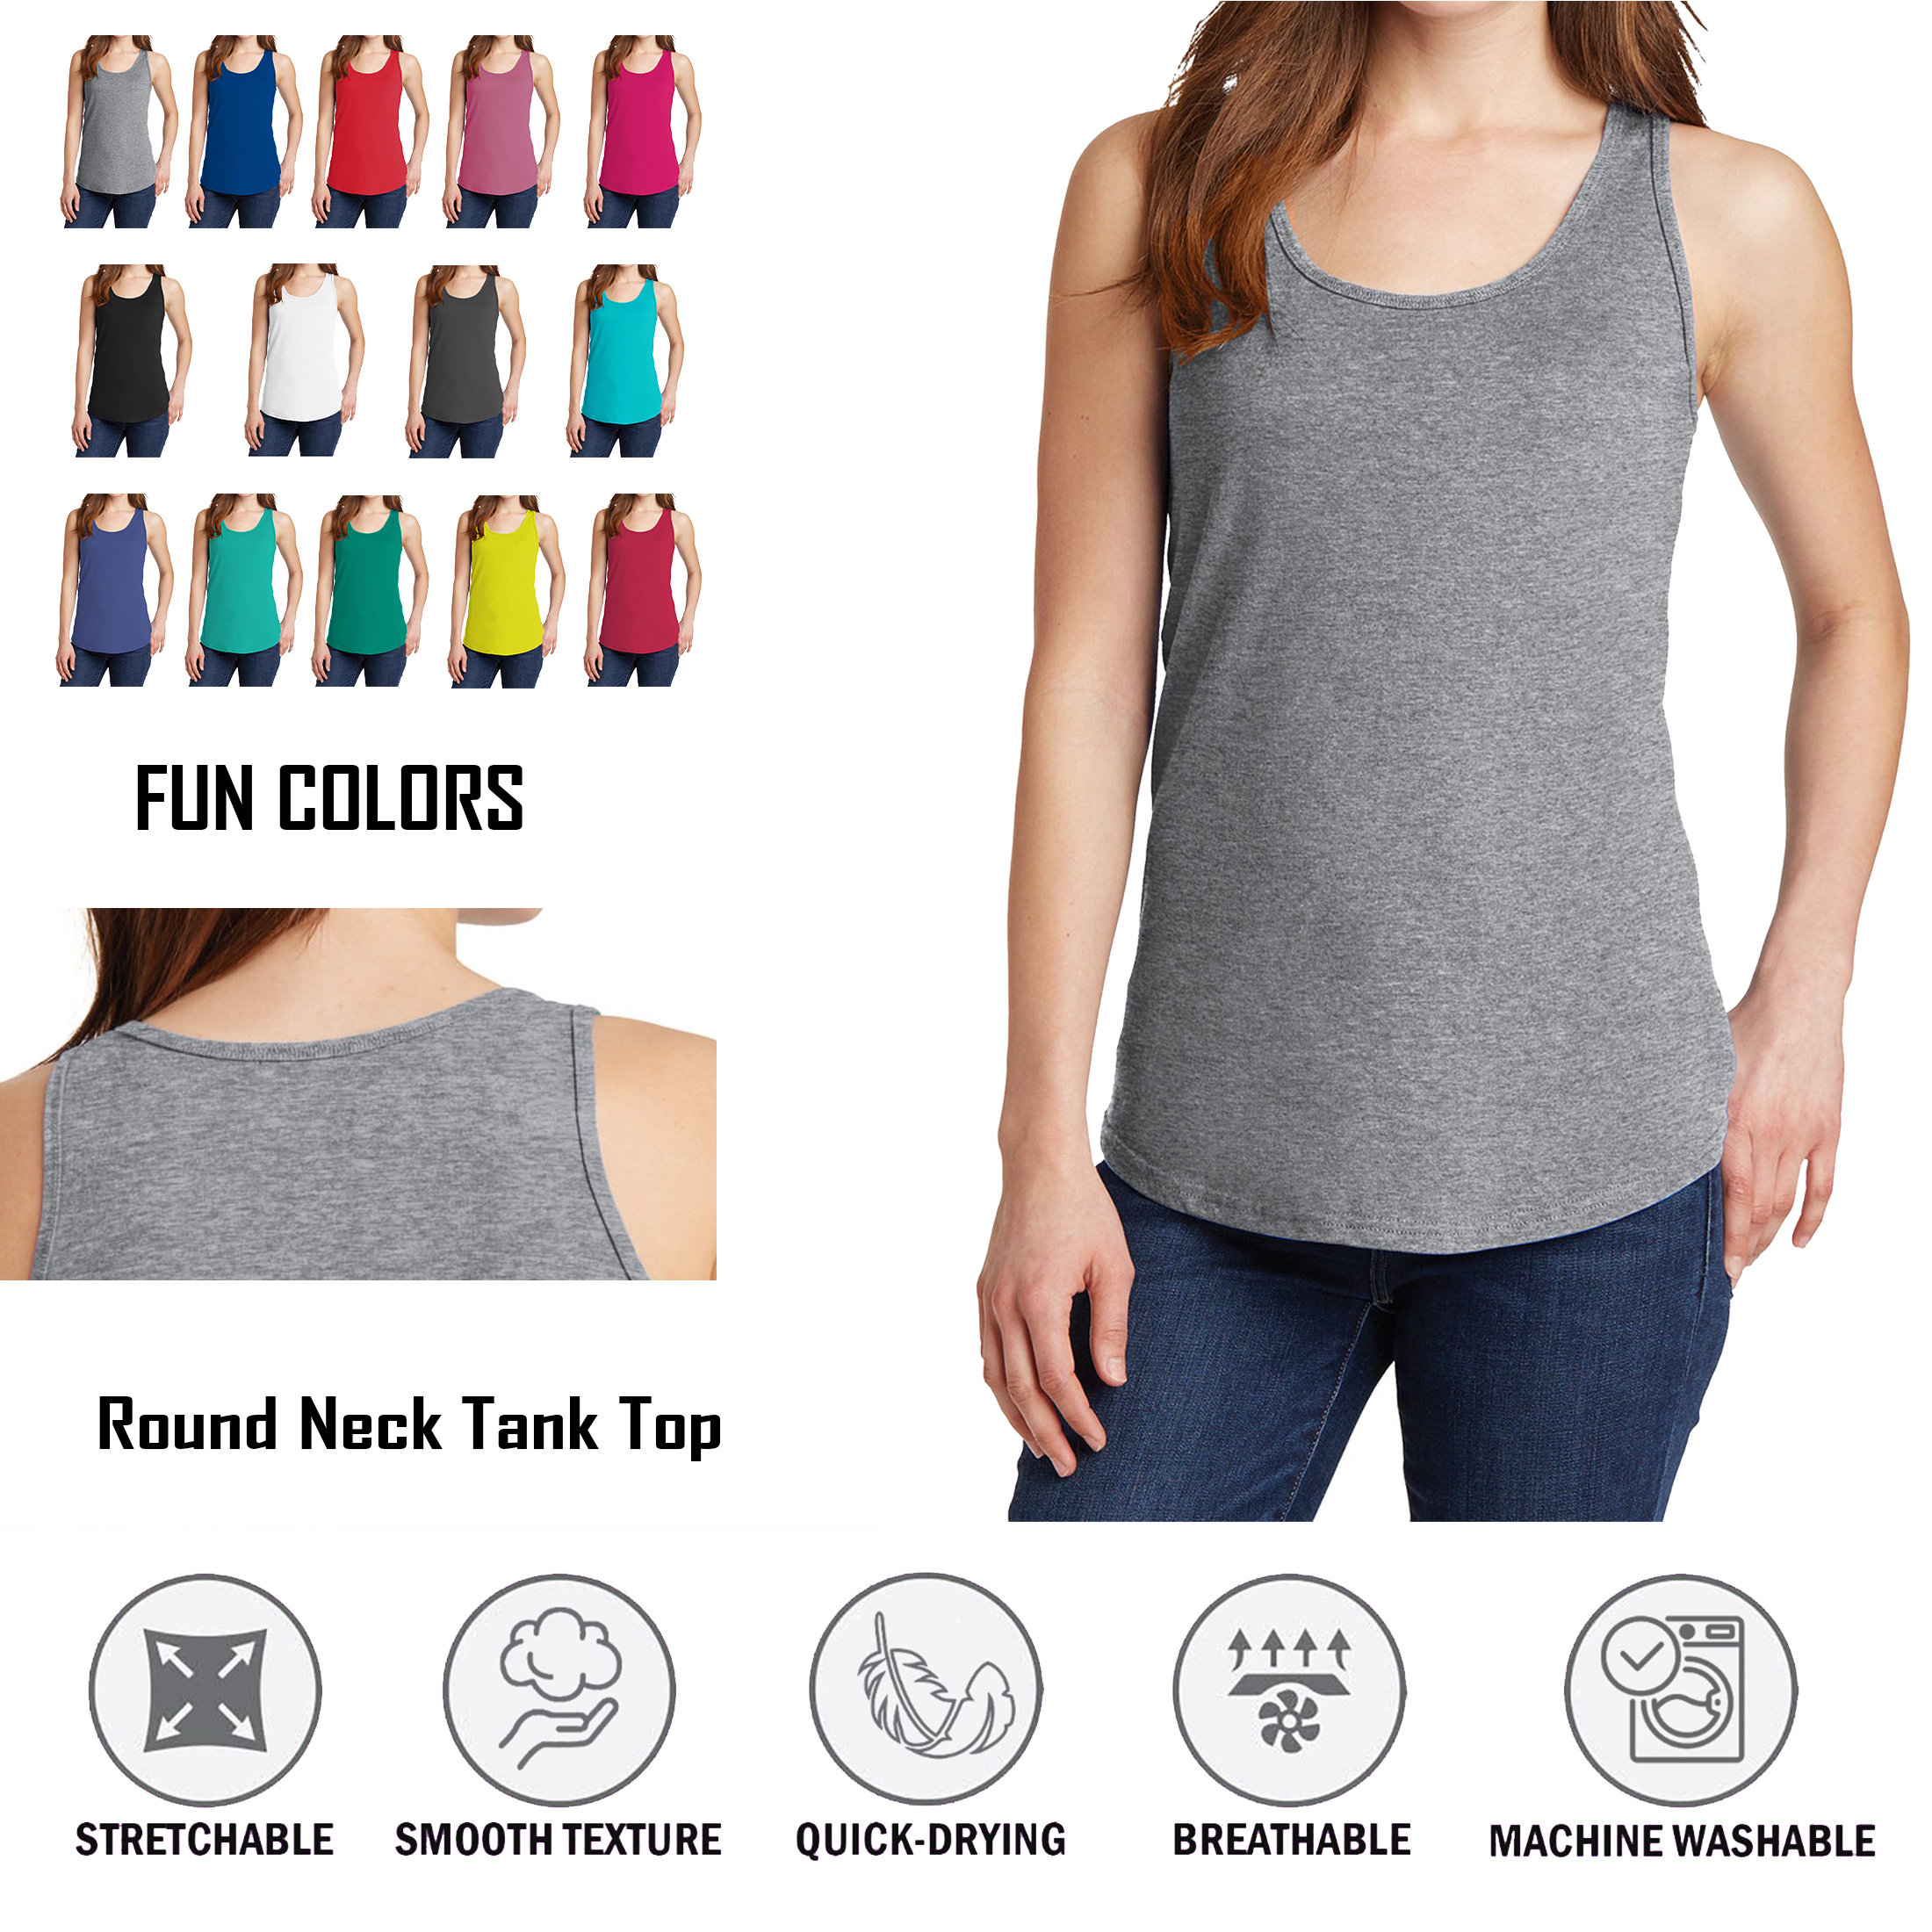 6-Pack: Women's Lightweight Crew Neck Solid Fit Ultra-Soft Summer Gym Sports Tank Top - Small